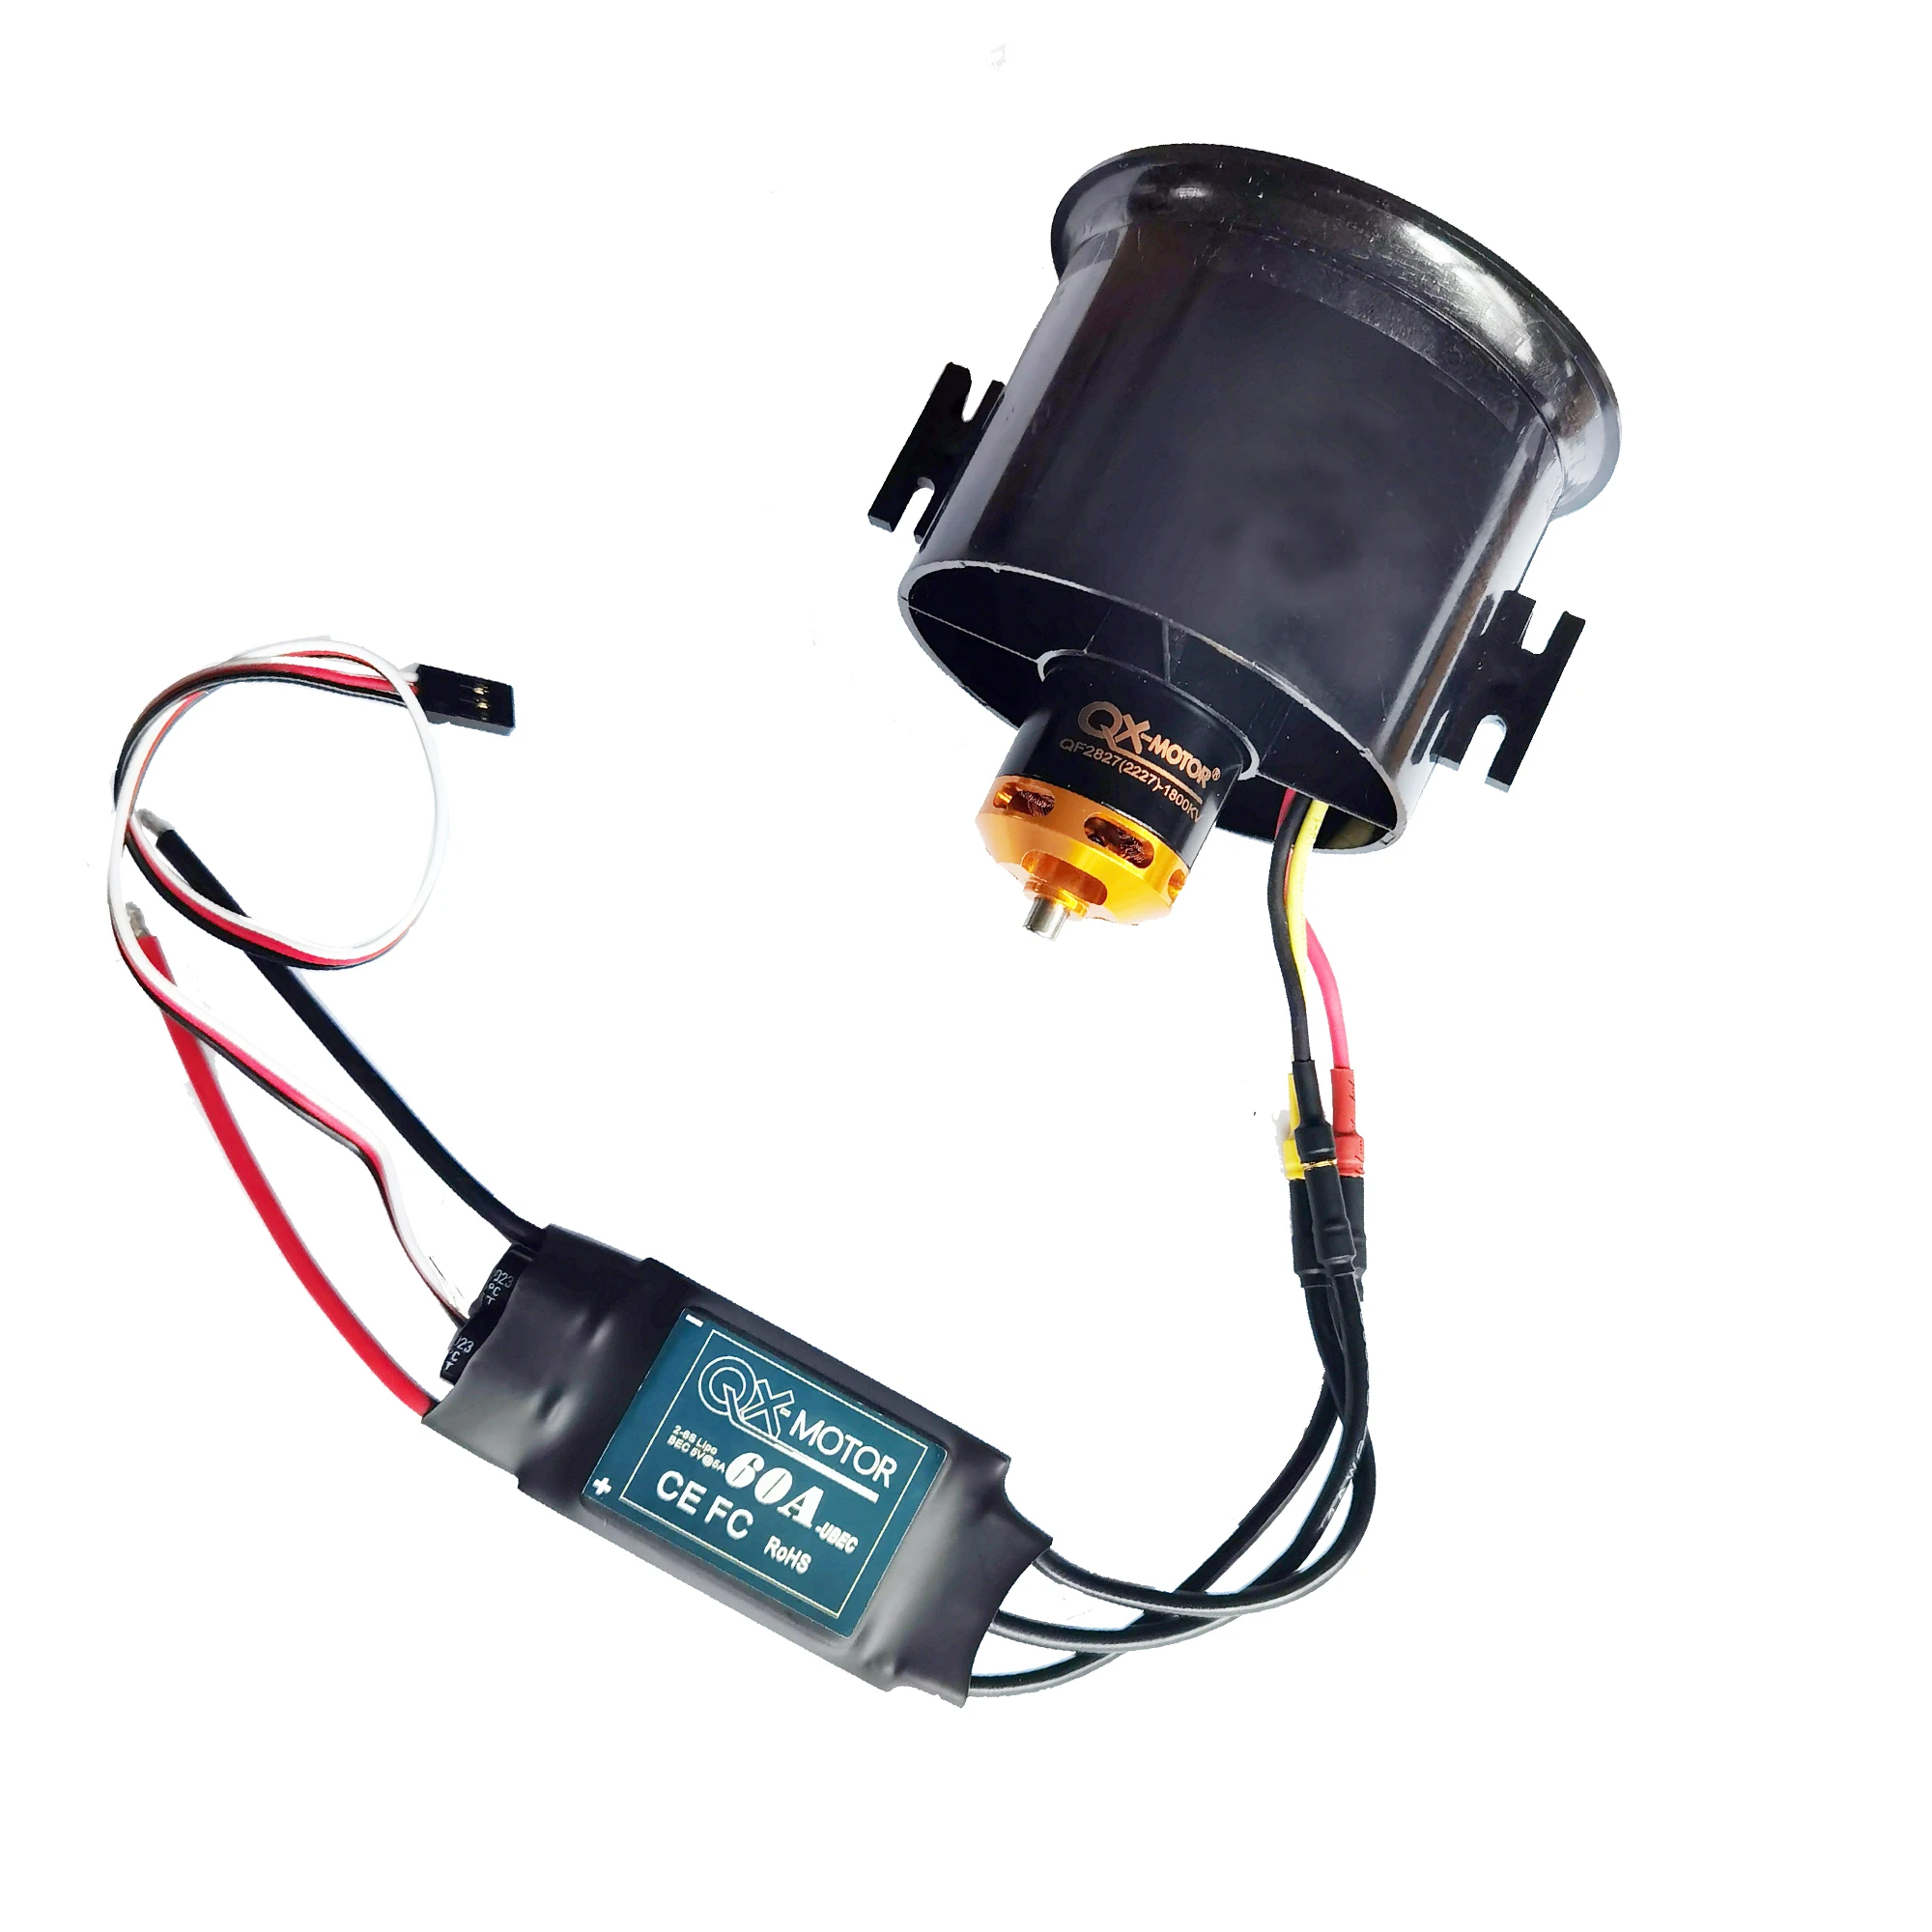 Qx-MOTOR EDF 70MM ducted fan 12 blade brushless motor QF2827 2600KV/1800KV motor 60A 80A esc model aircraft accessories